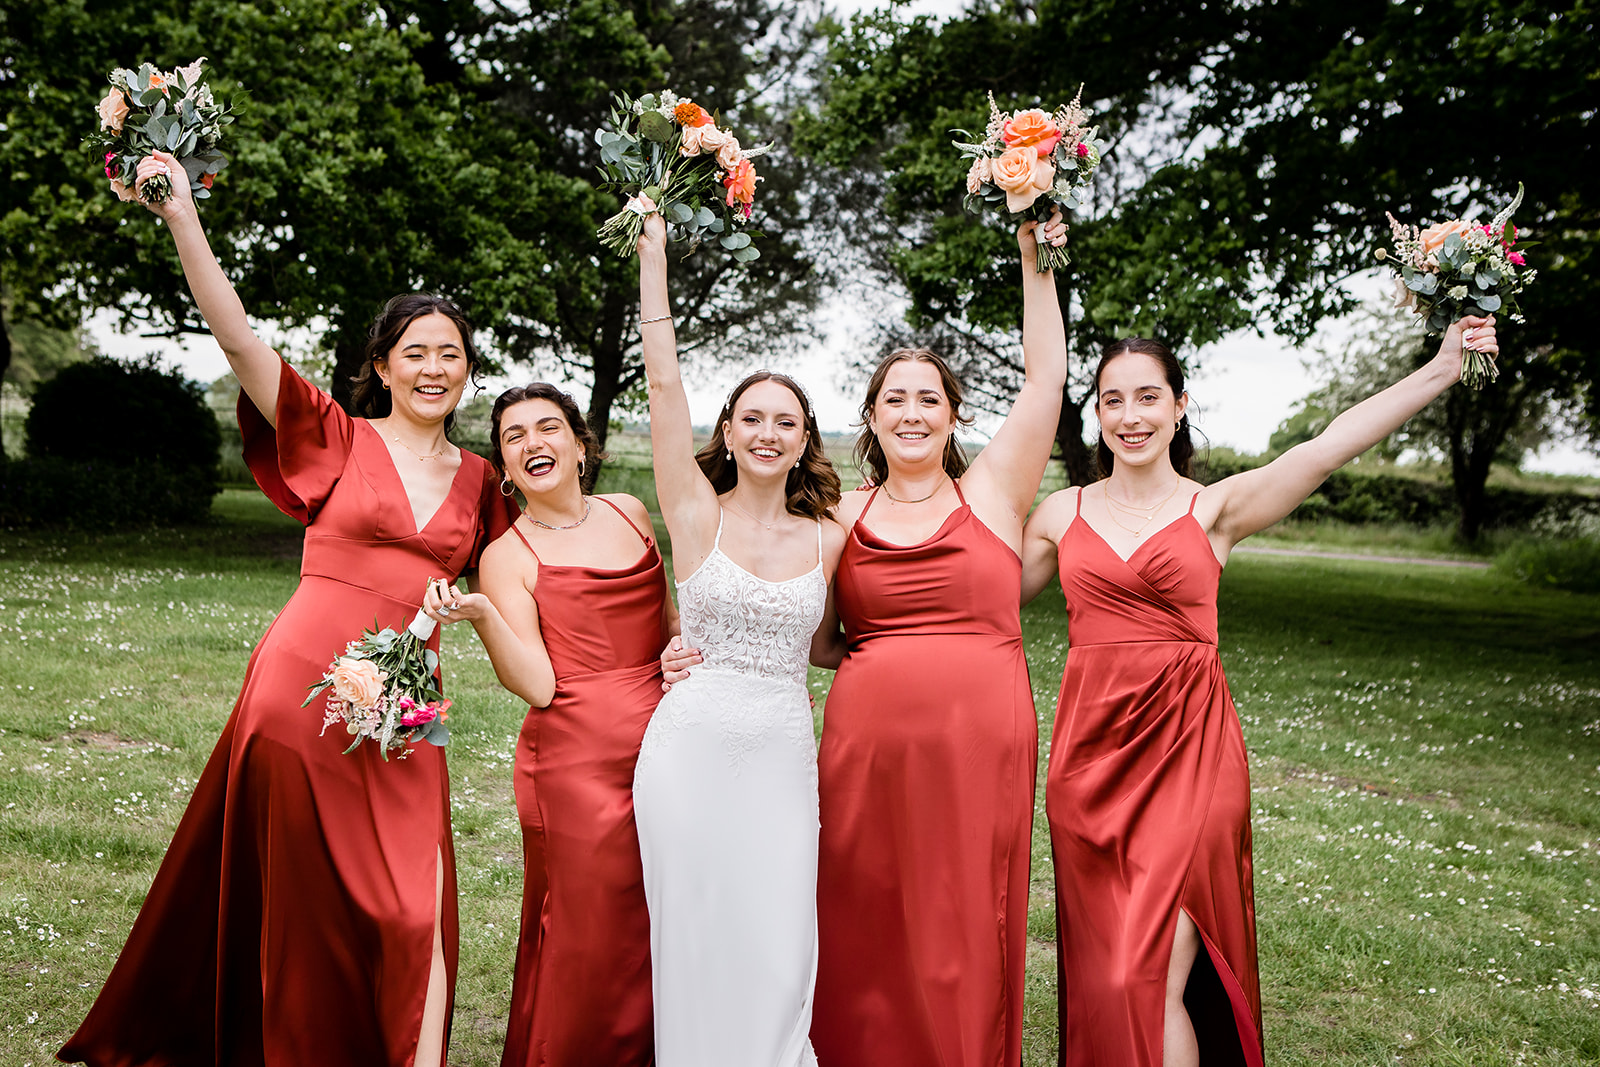 Bride and bridesmaids cheering with the wedding bouquets